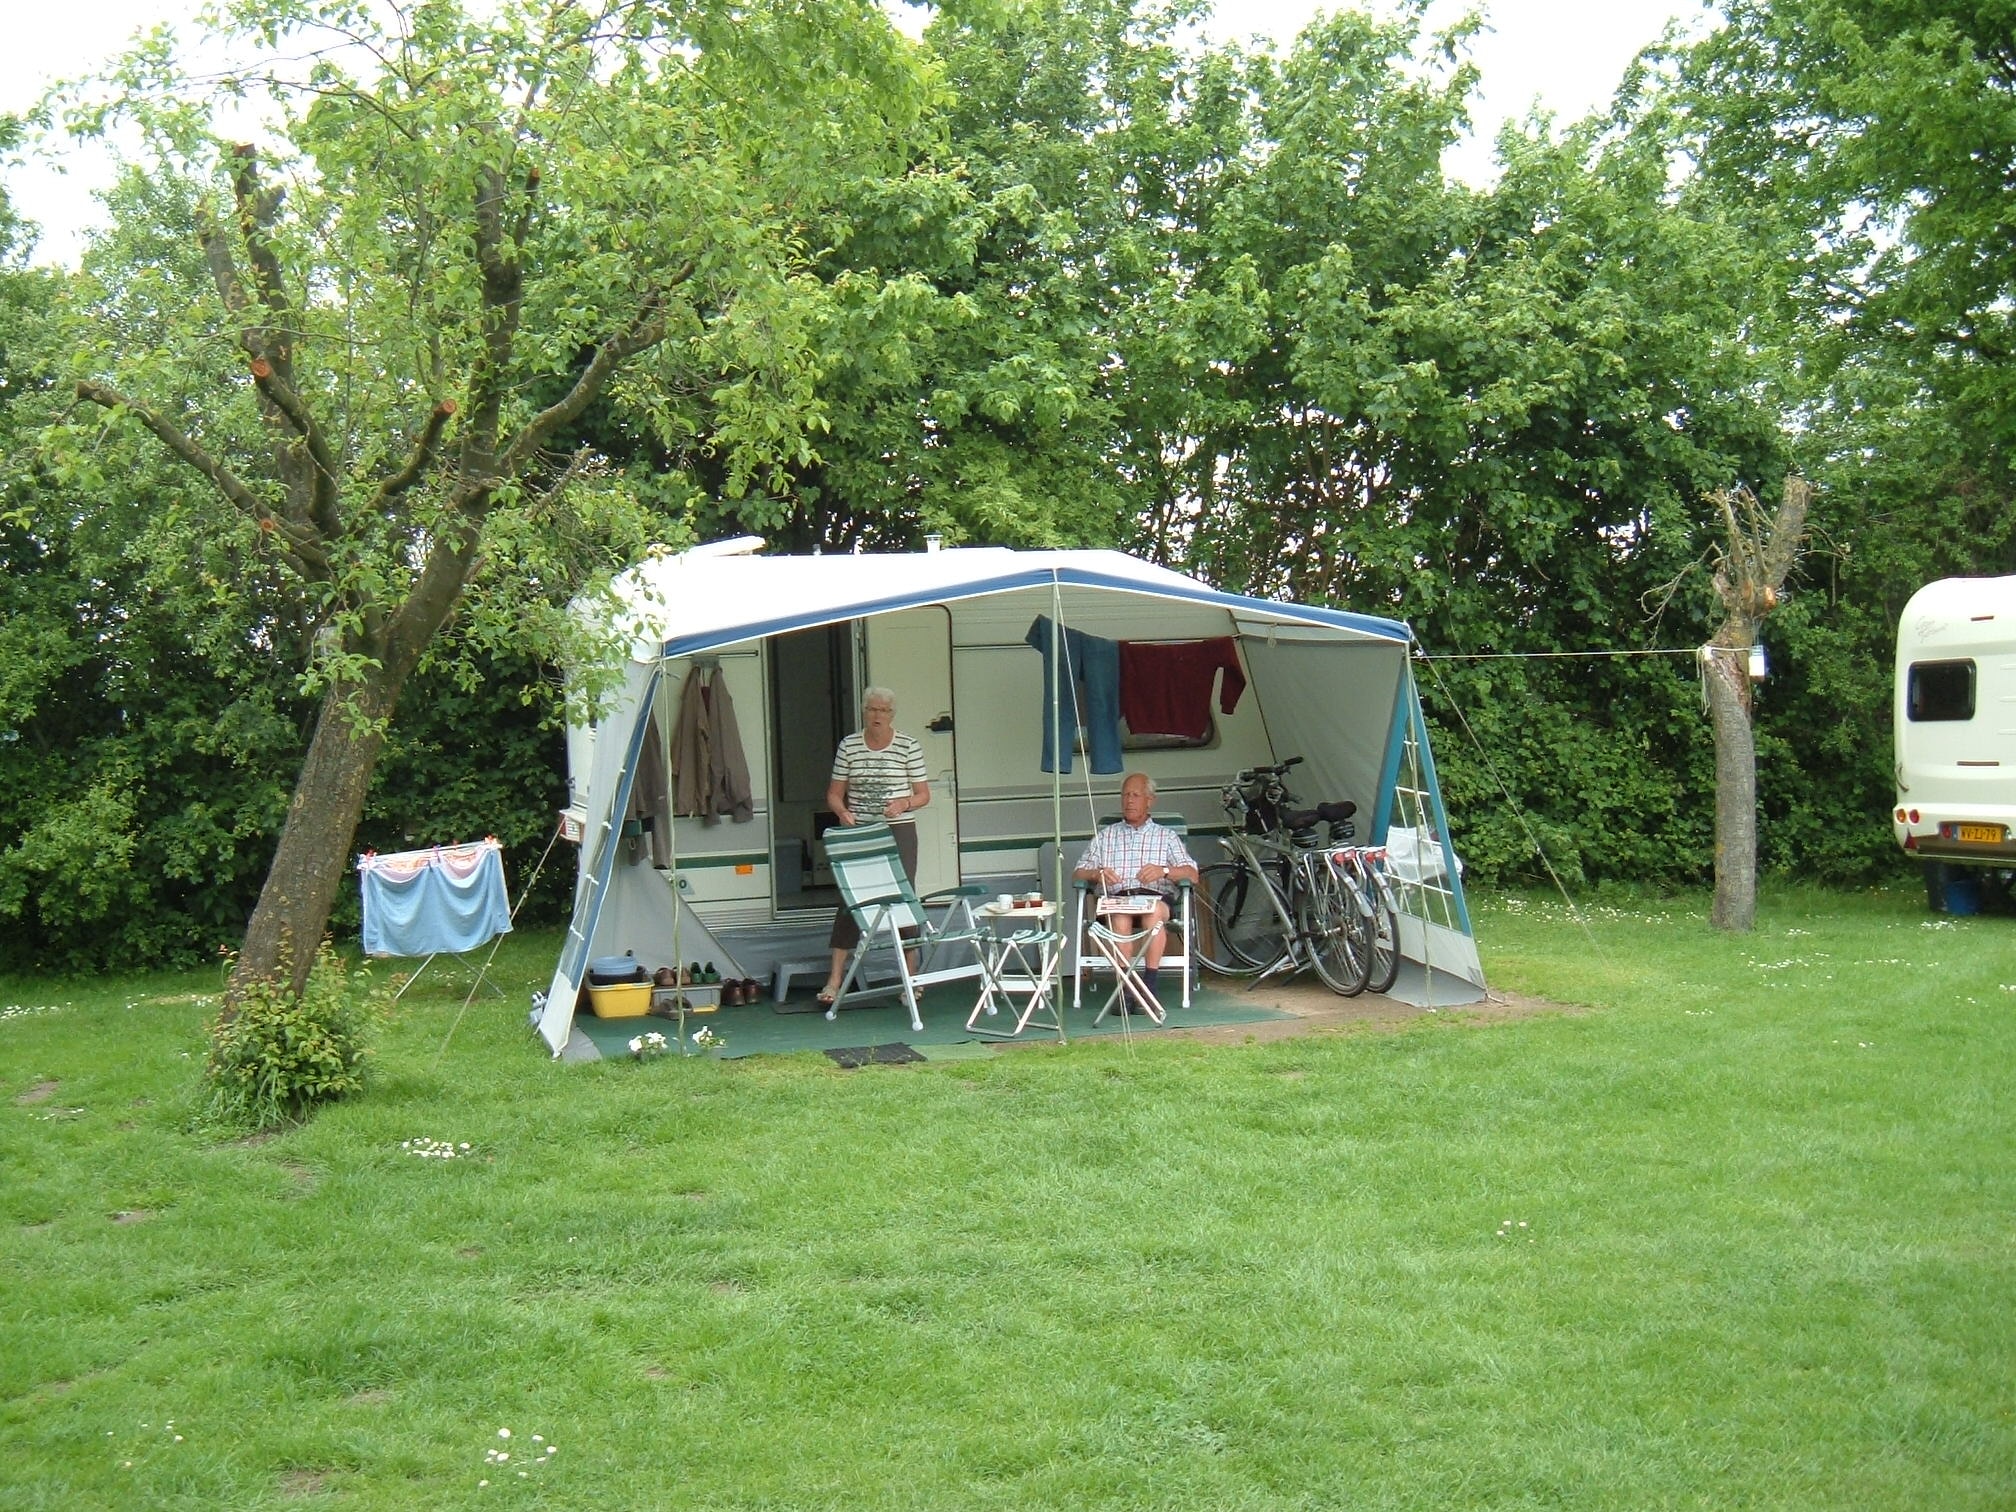 Camping 't Bakhuis